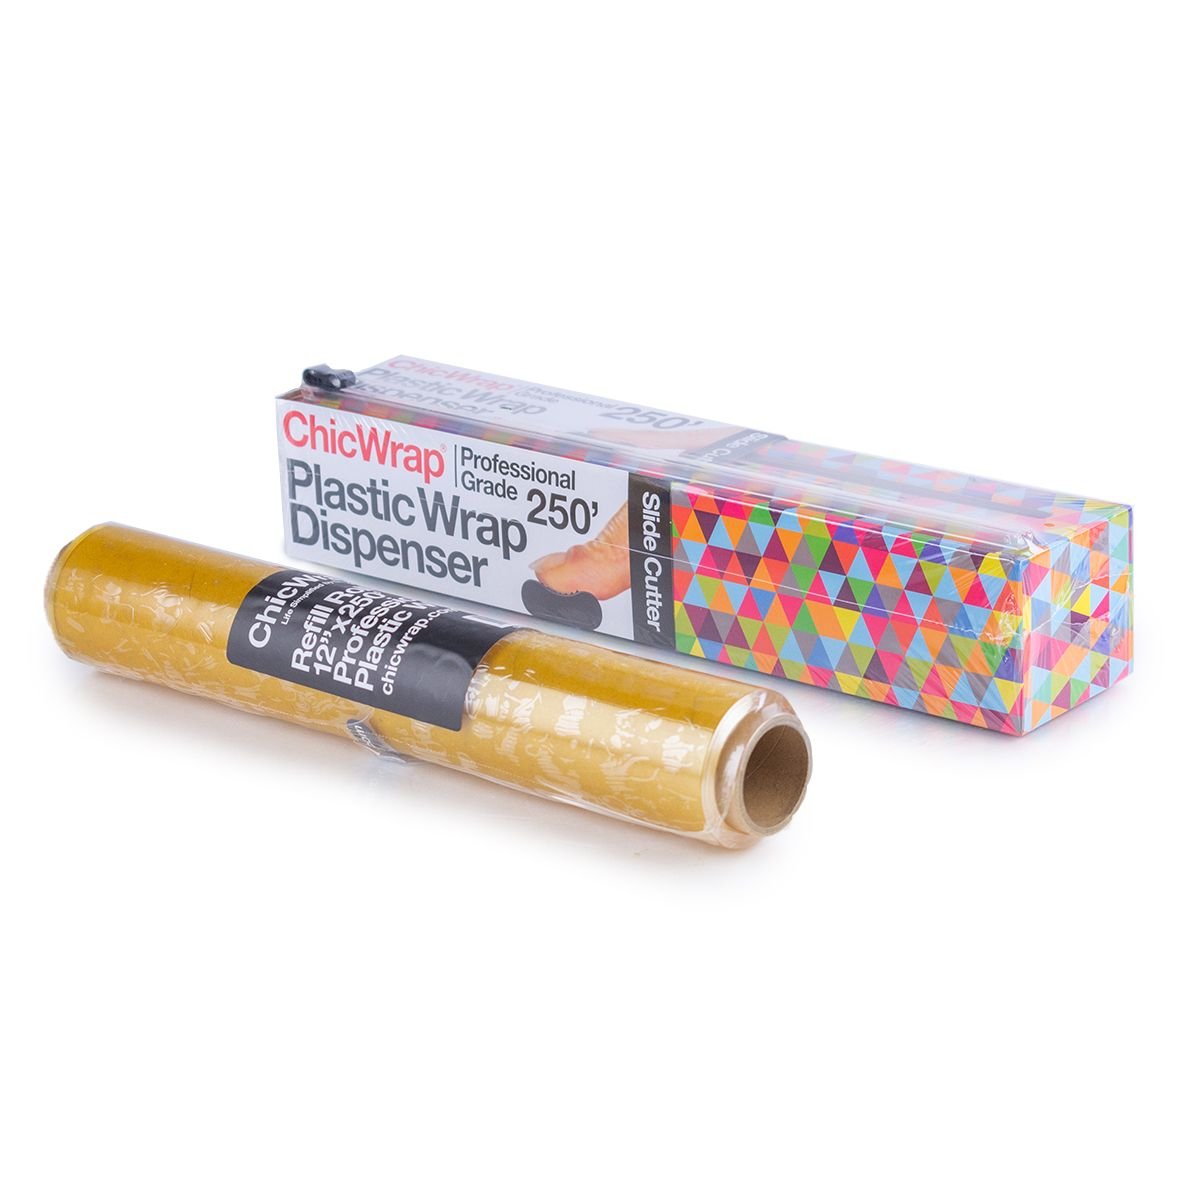 ChicWrap Marble Refillable Plastic Wrap Dispenser with 250' of